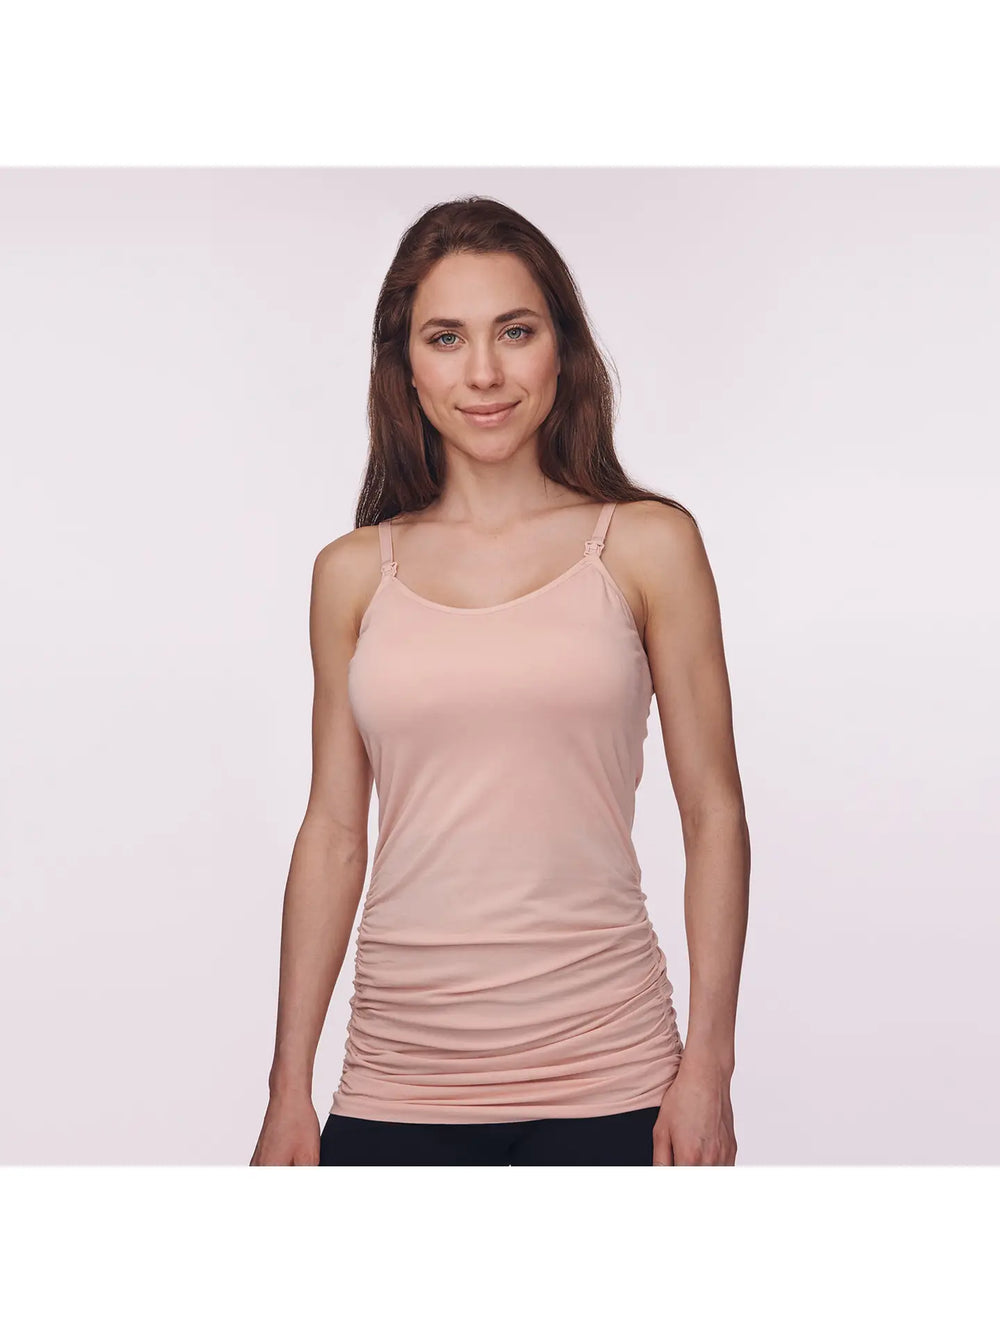 Under Control Maternity Breastfeeding Camisole, in Mauve (Pink) Single